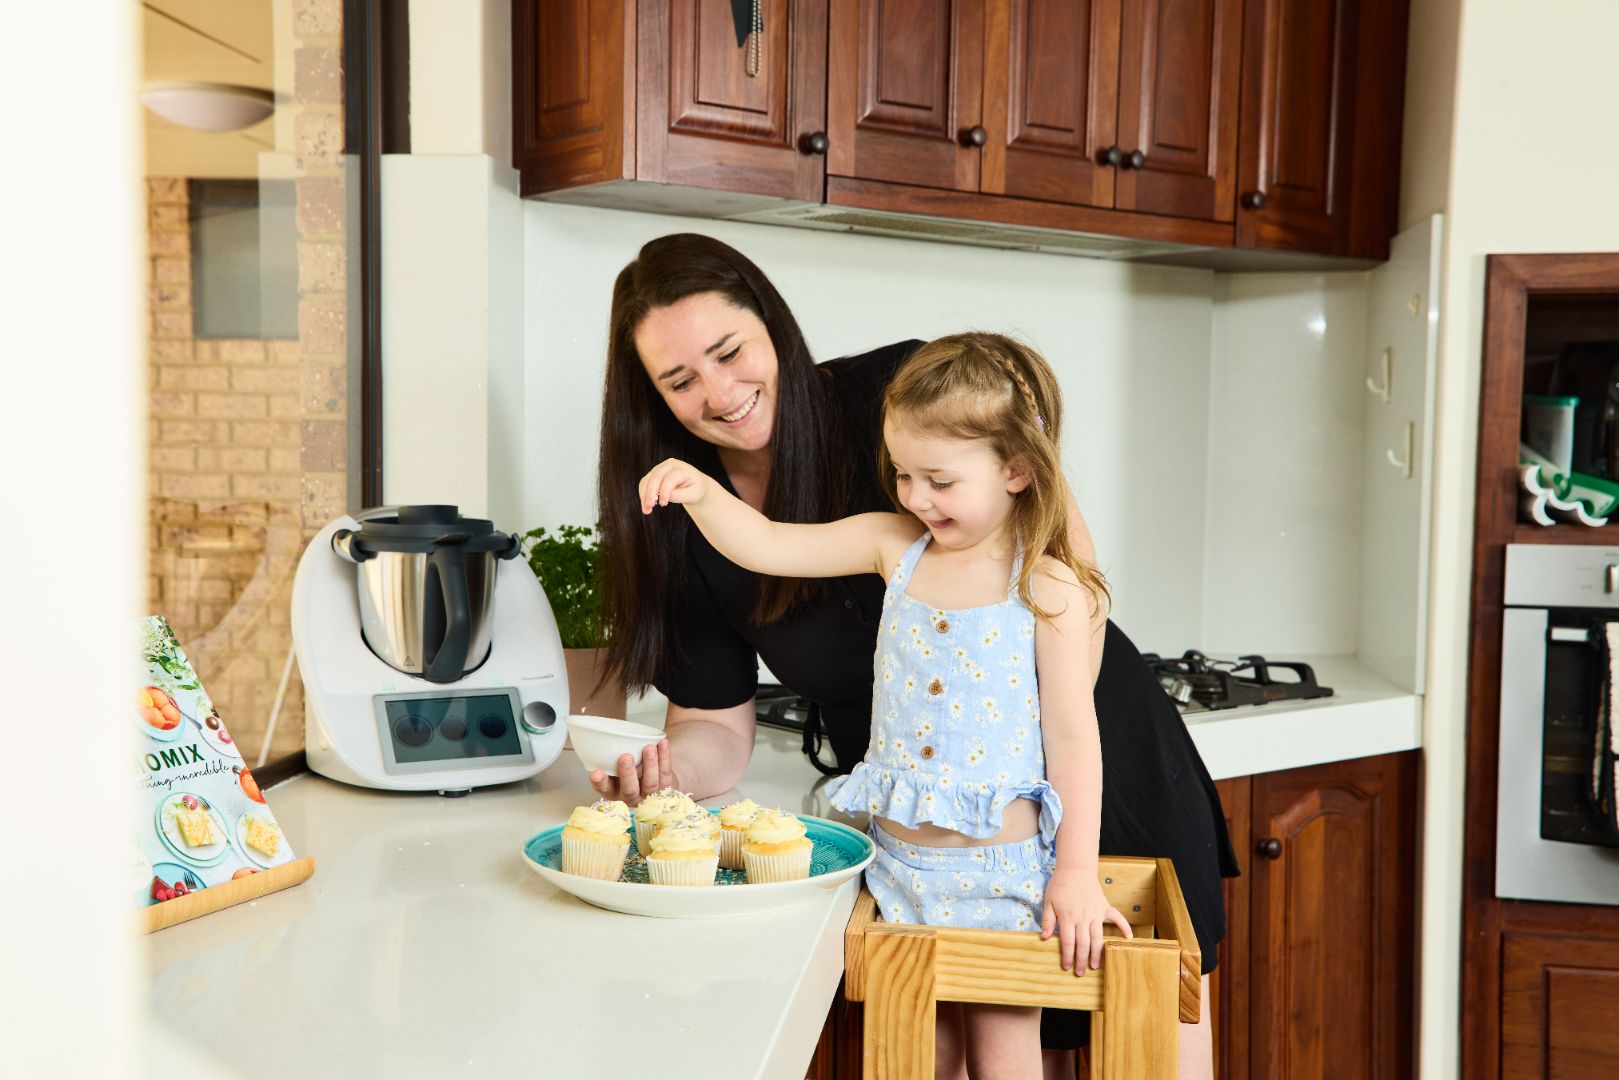 Thermomix® brings financial freedom and a business that fits around three kids